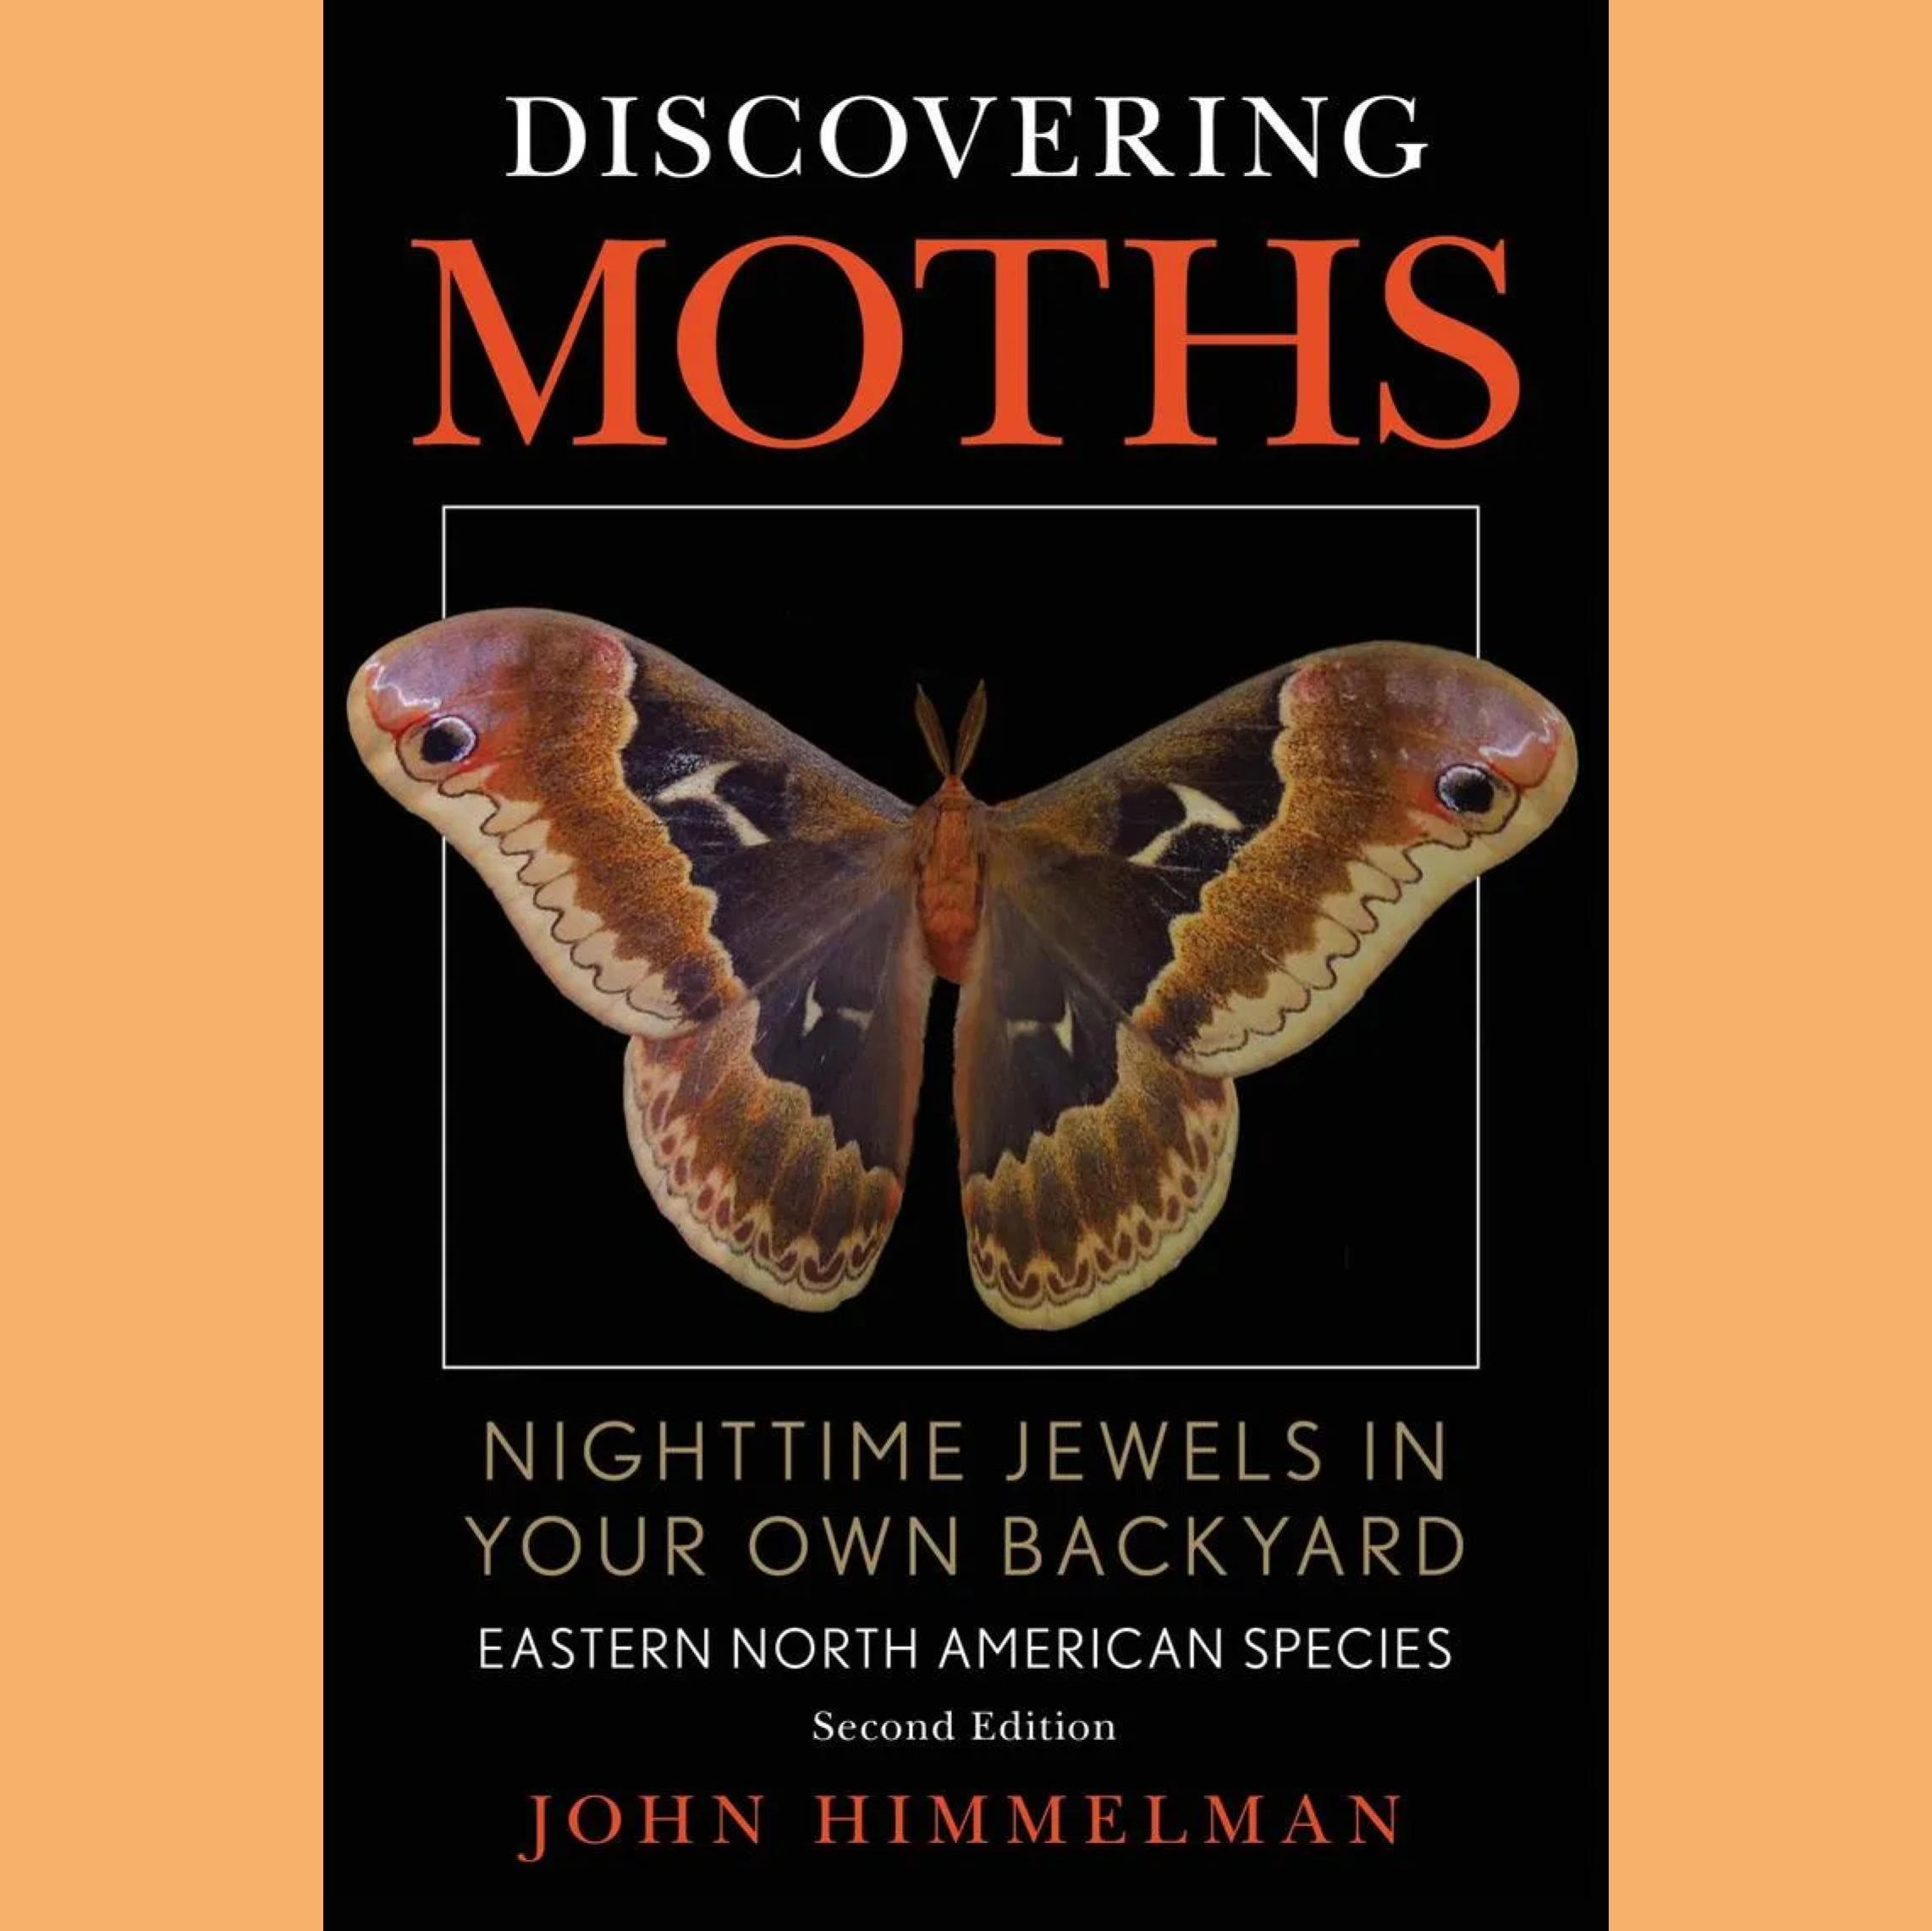 Moth on cover of book 